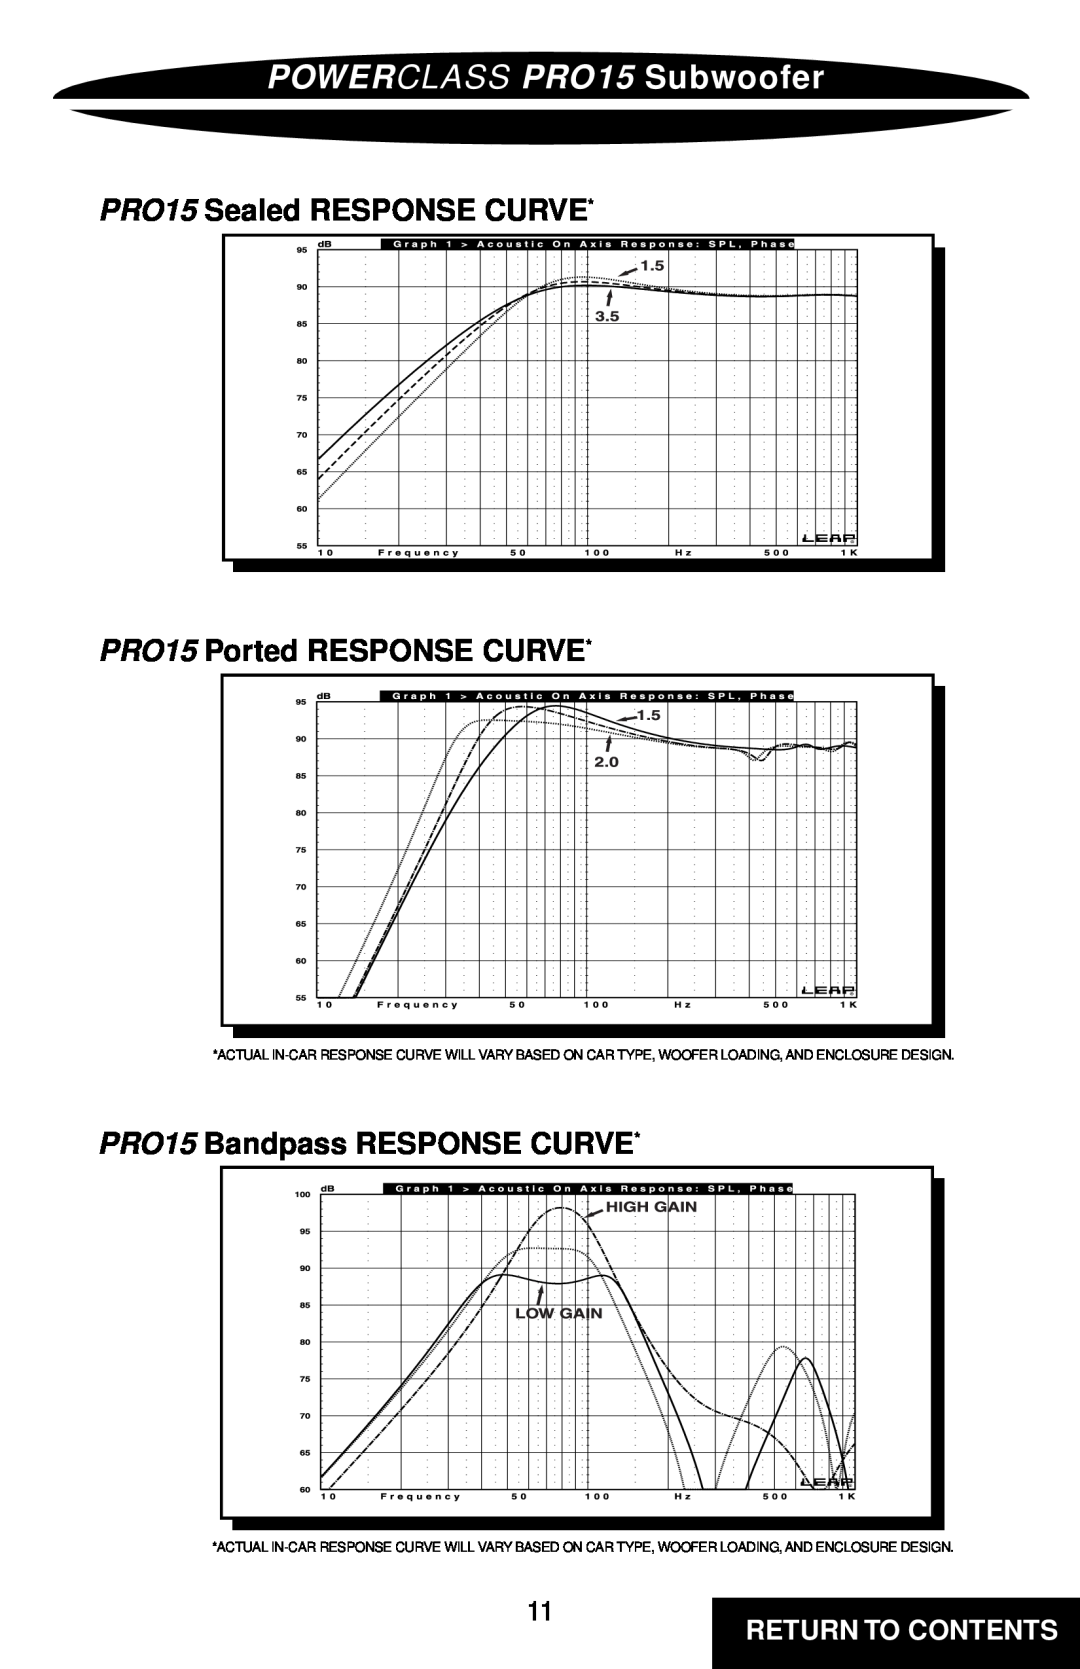 Precision Power owner manual POWERCLASS PRO15 Subwoofer, PRO15 Sealed RESPONSE CURVE, PRO15 Ported RESPONSE CURVE 